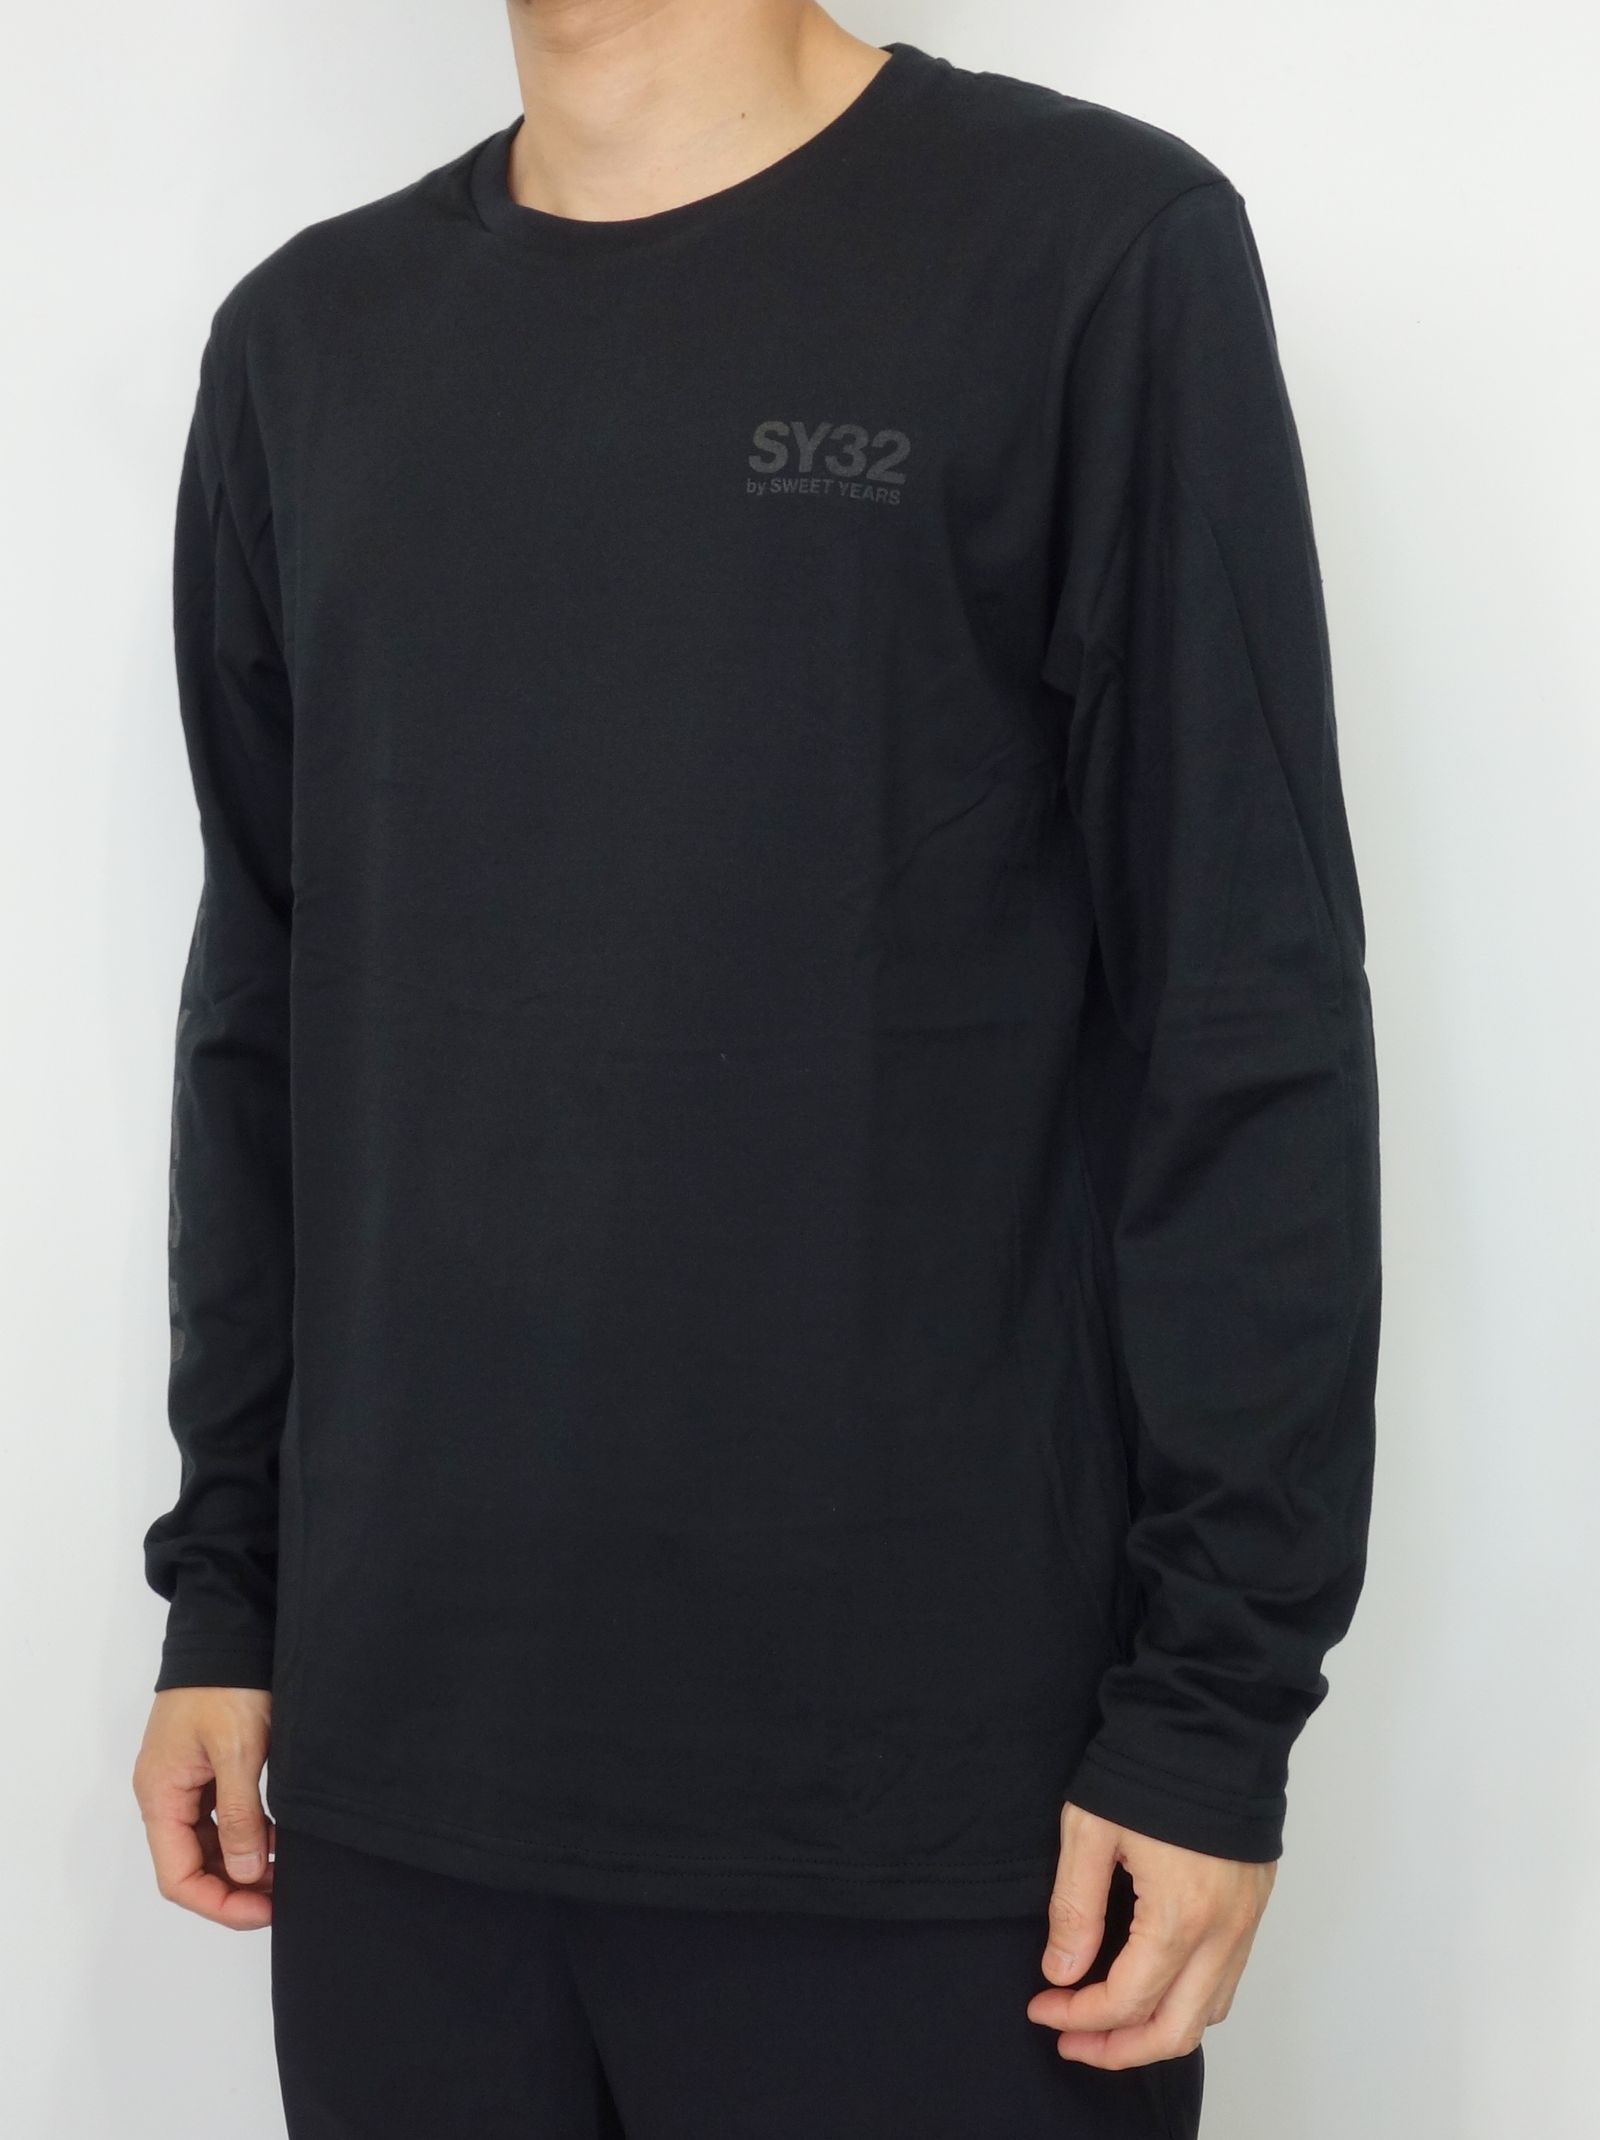 SY32 by SWEET YEARS - ARM LOGO L/S TEE / TNS1726J / ロングスリーブ